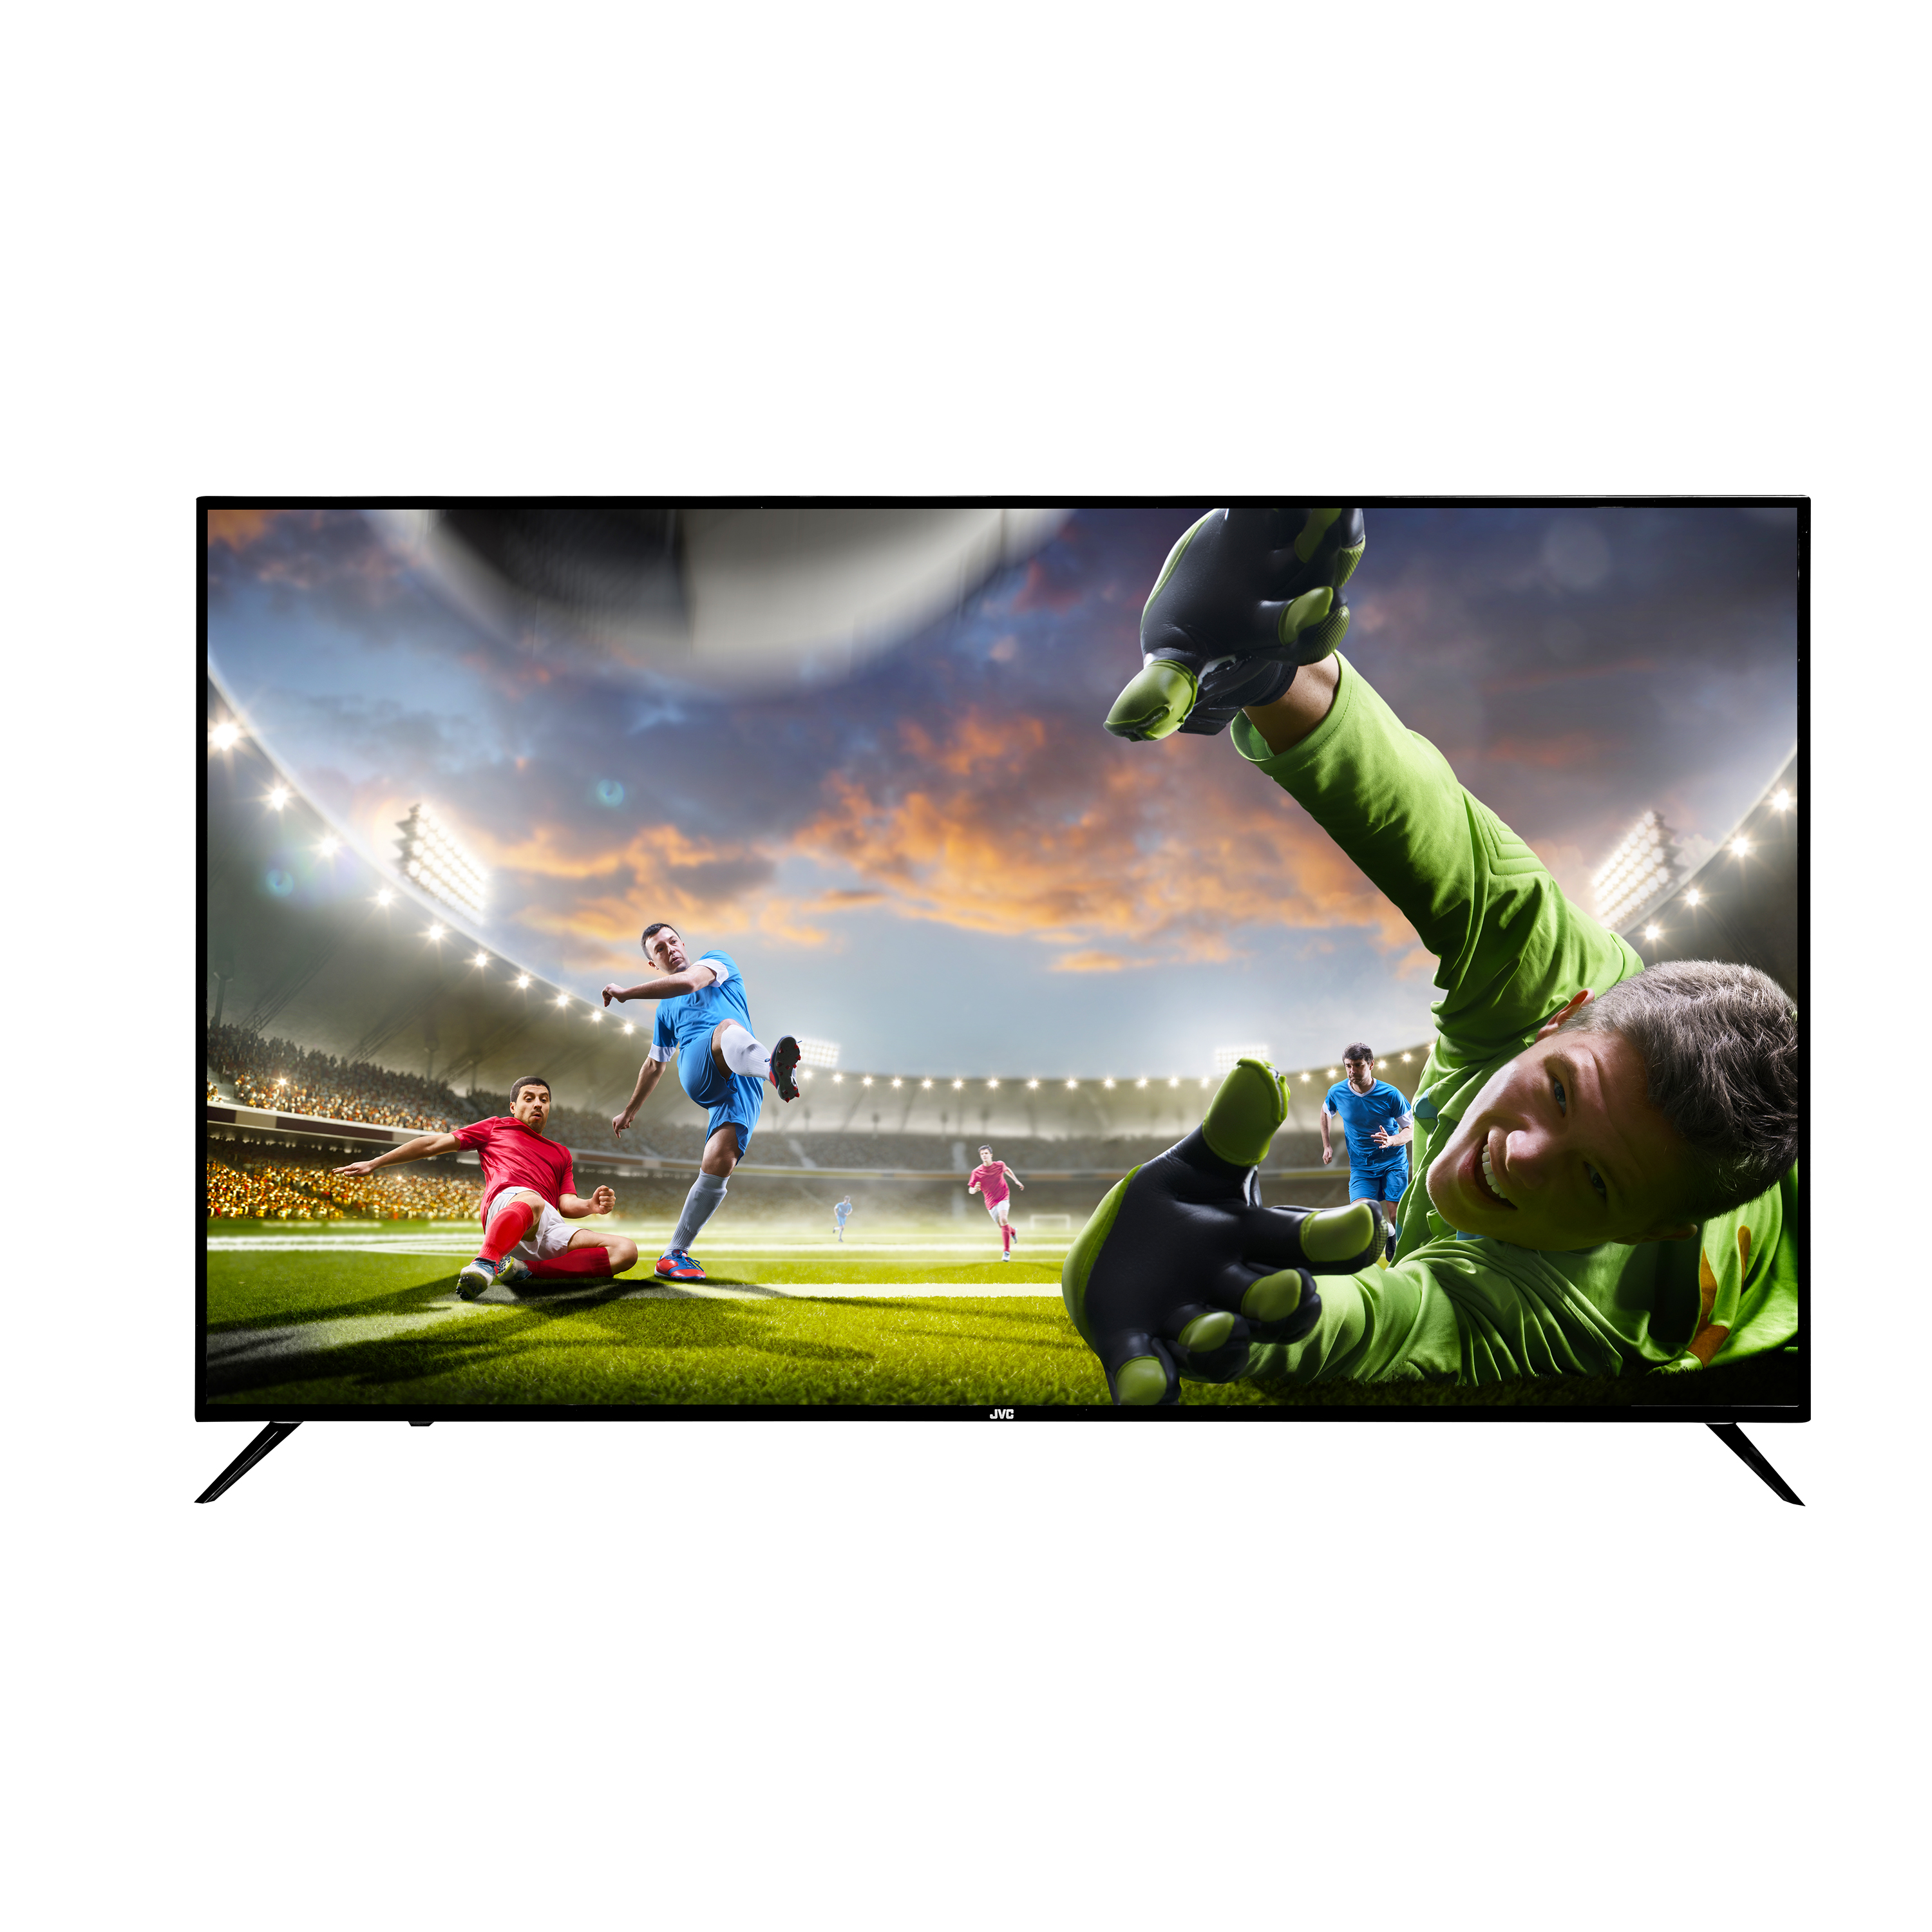 JVC 65" Class 4K Ultra HD (2160p) HDR Smart LED TV with Built-in Chromecast (LT-65MA875) - image 5 of 8